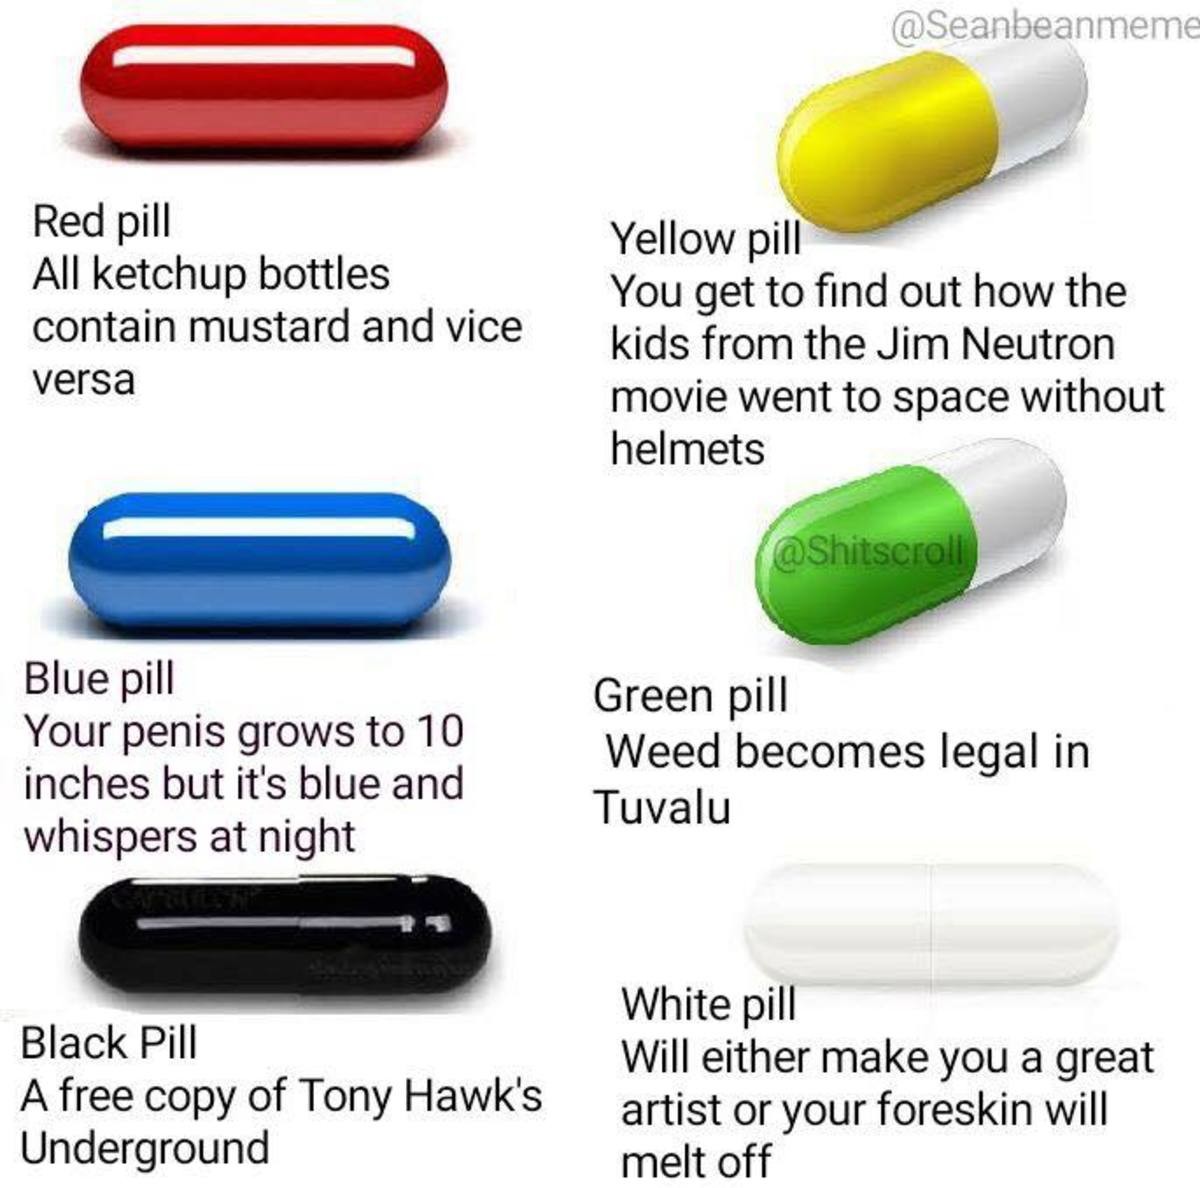 What pill make your dick bigger